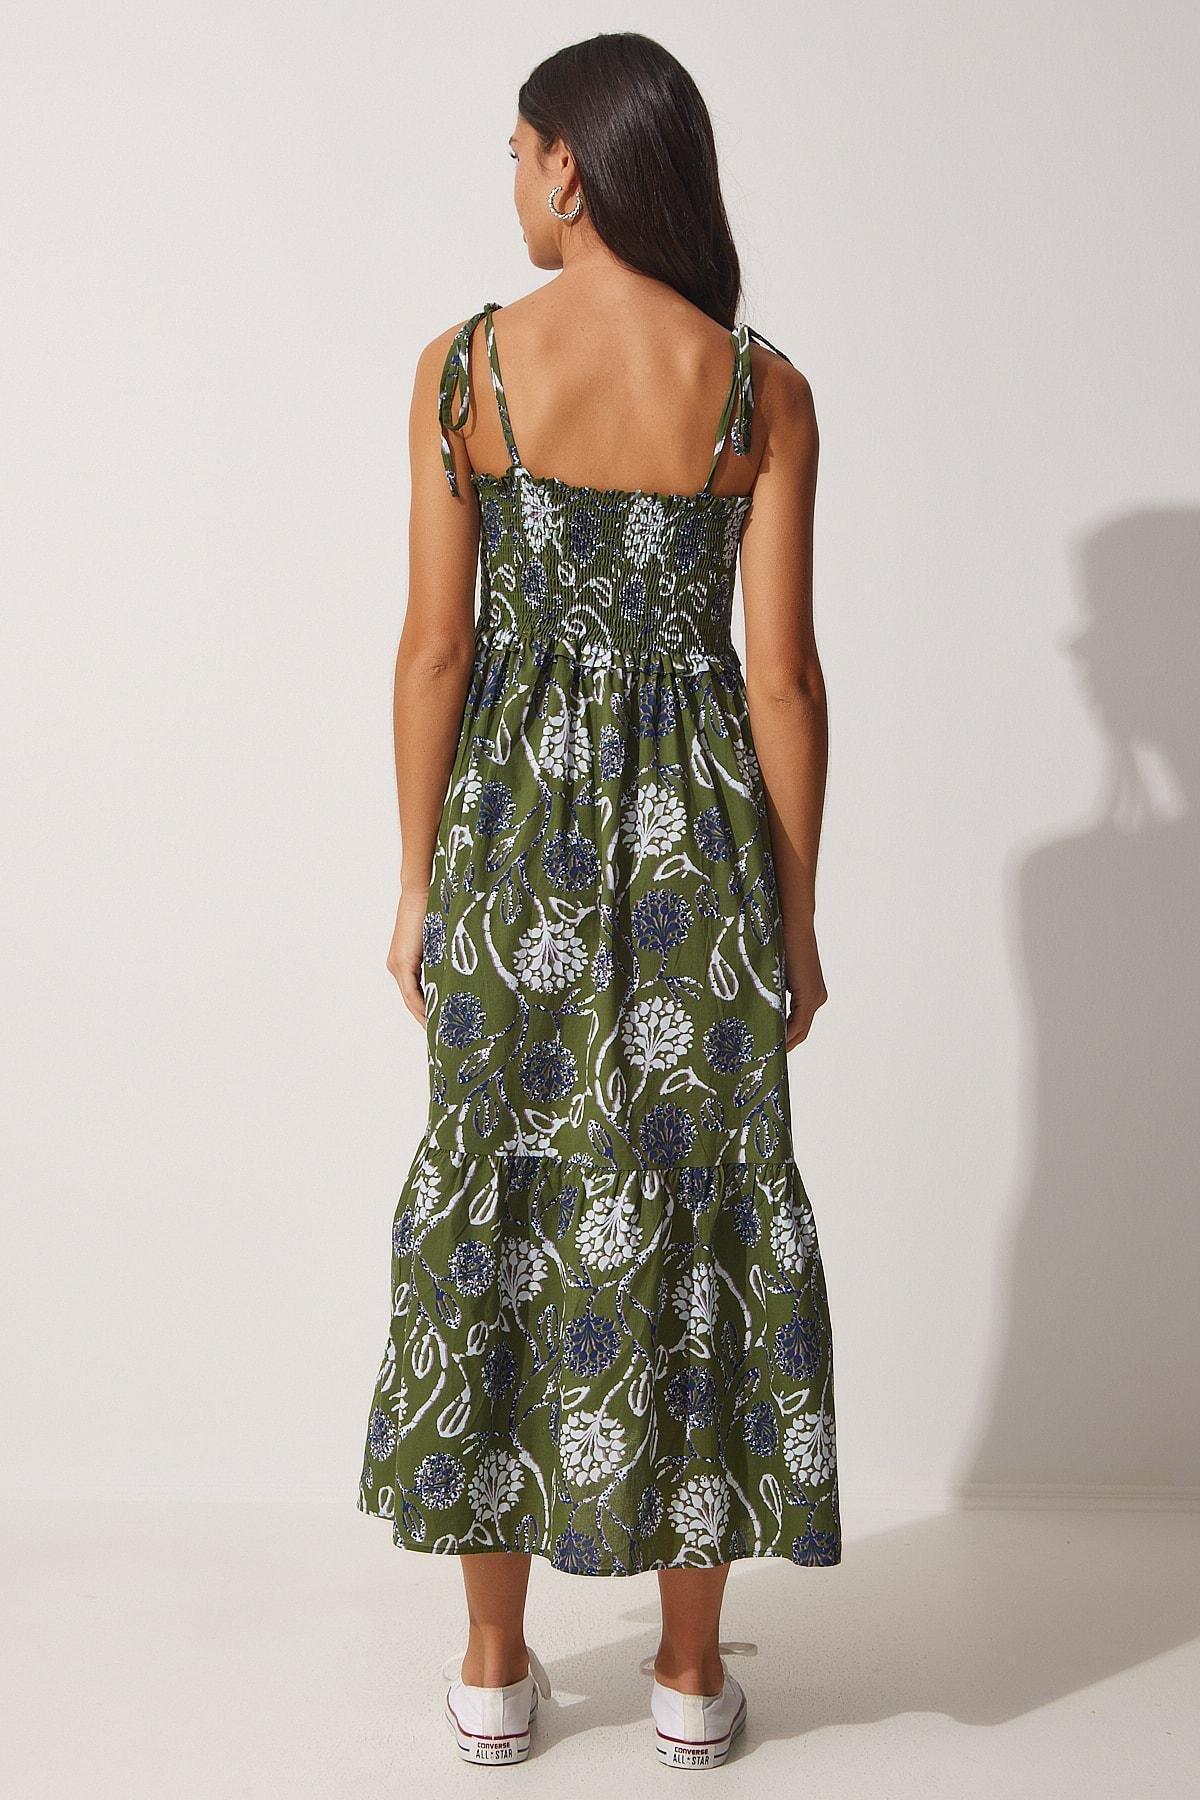 Happiness Istanbul - Green Floral Dress